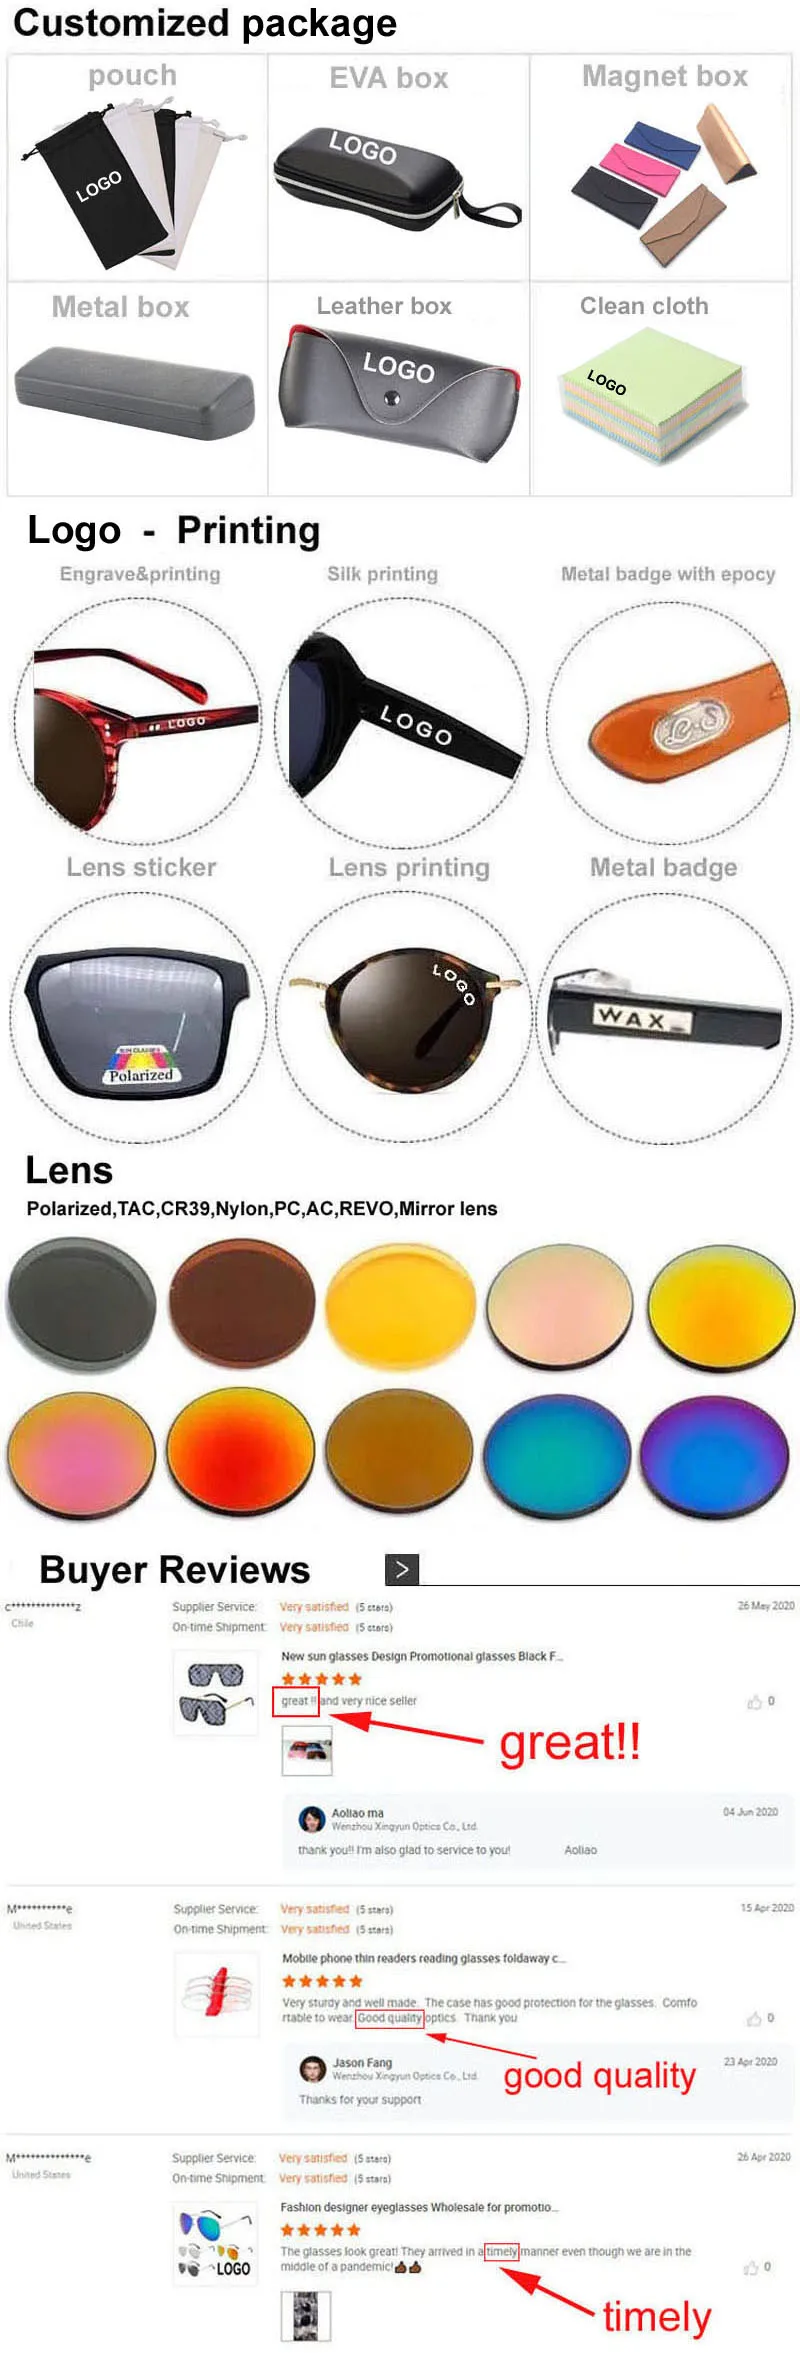 A man's guide to choosing lens coating and lens color #menwithclass  #mensstyle #sunglasses #accessories #infographic | インフォグラフィック